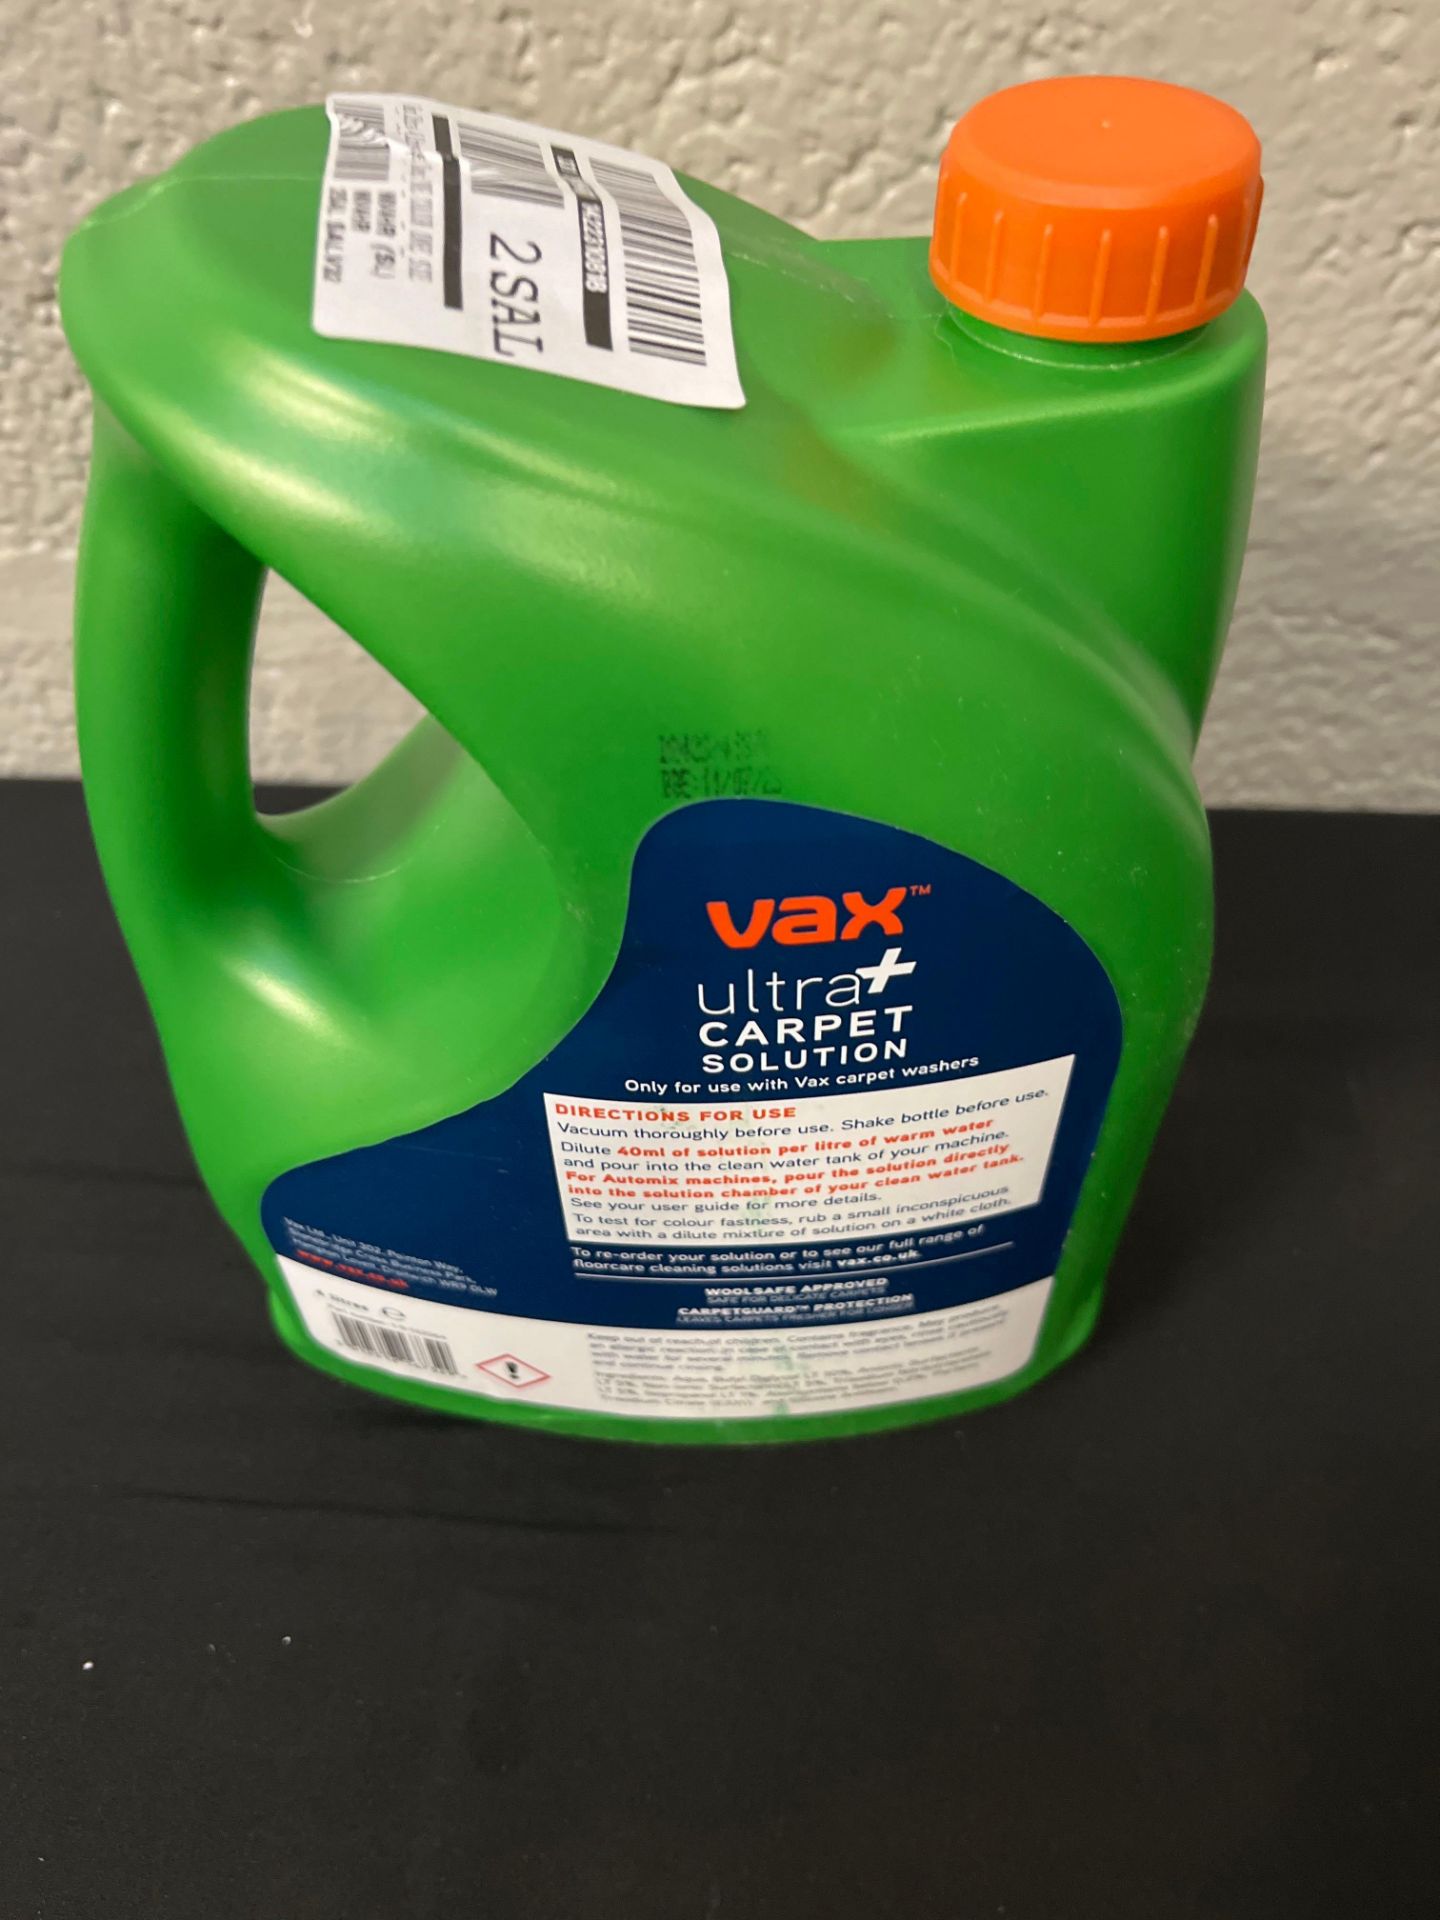 RRP £29 - Vax Ultra+ 4 Litre Carpet Cleaning Solut - Image 2 of 2